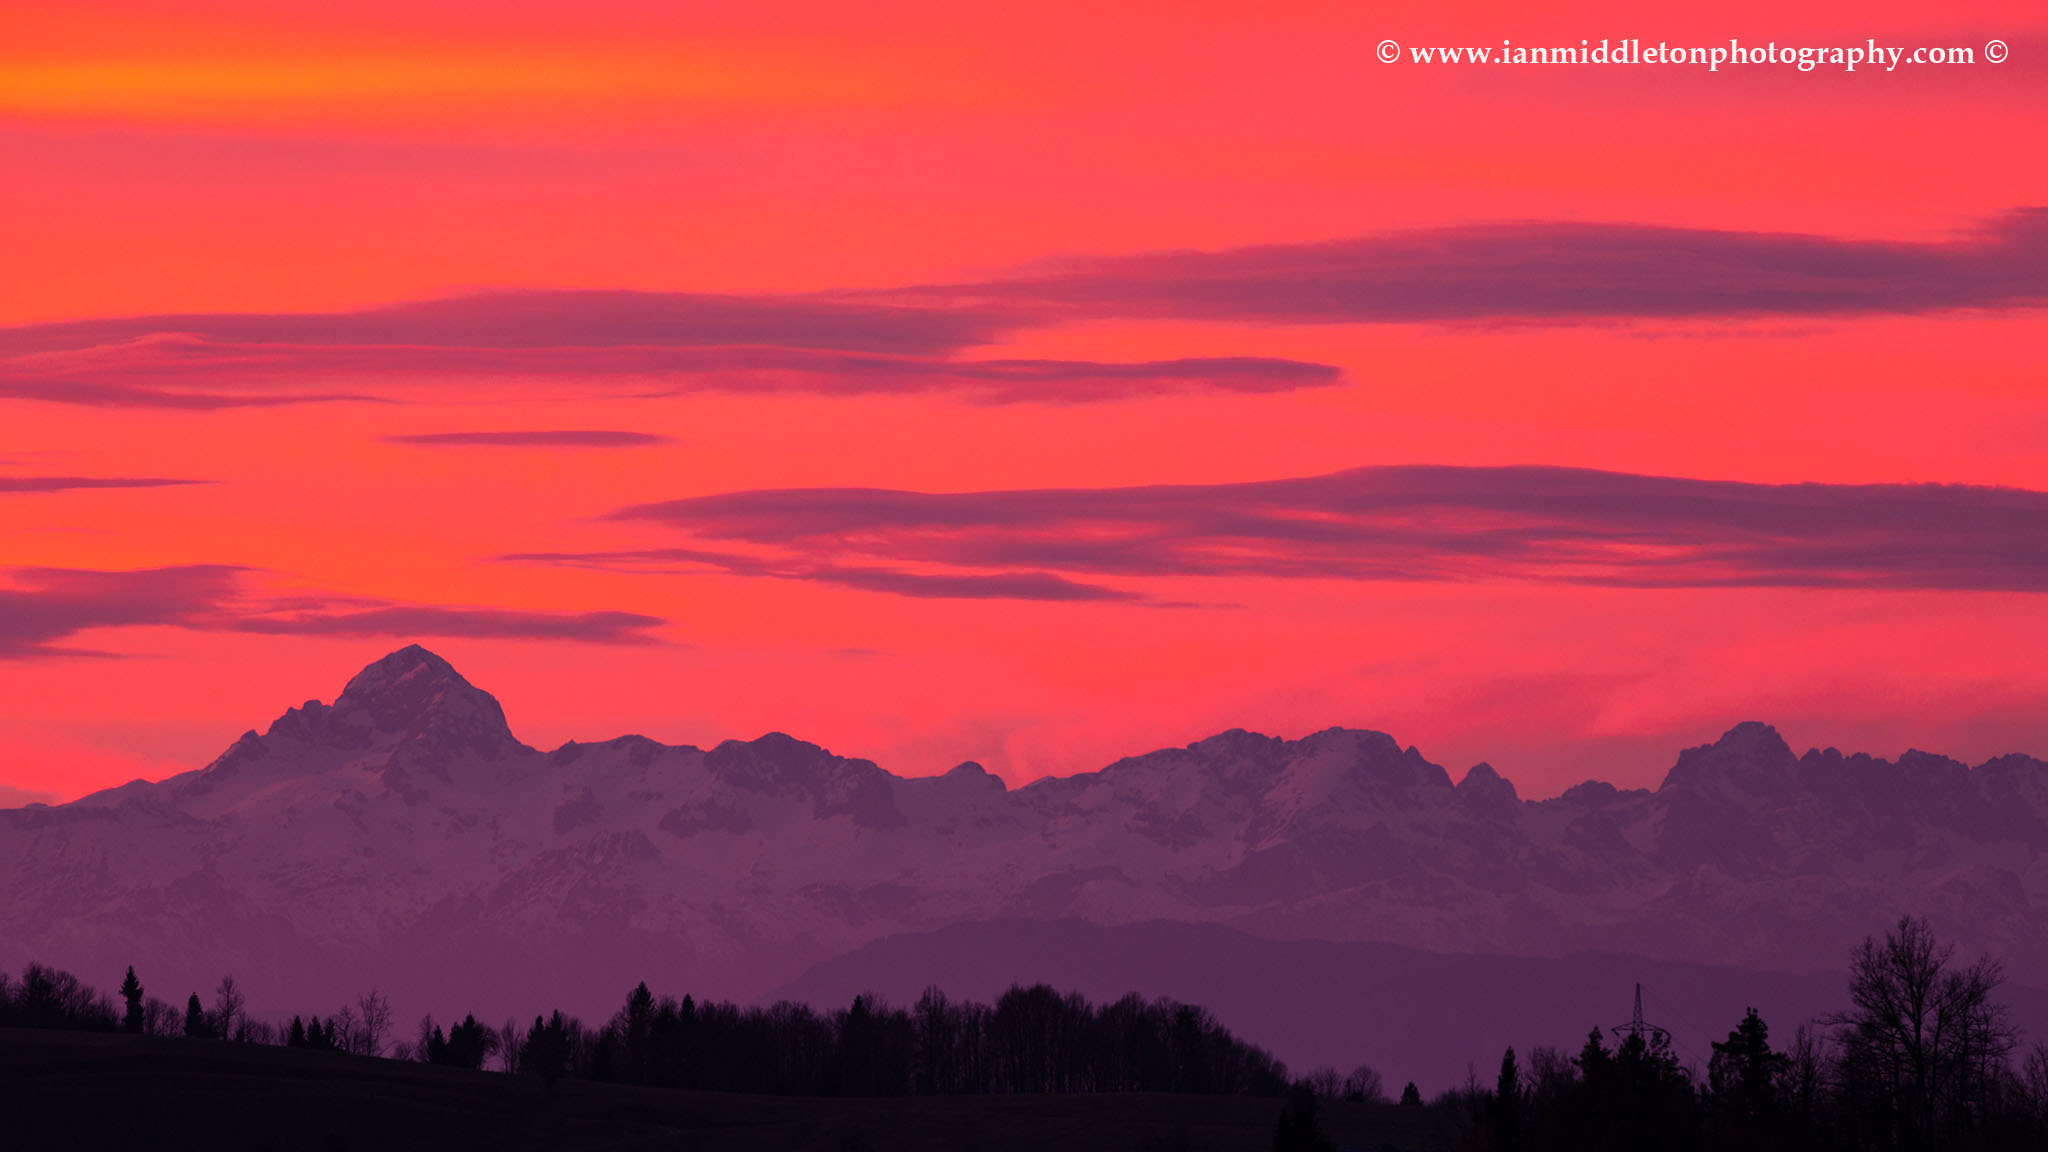 View across to the Mount Triglav and the Julian Alps mountains in the west at sunset.